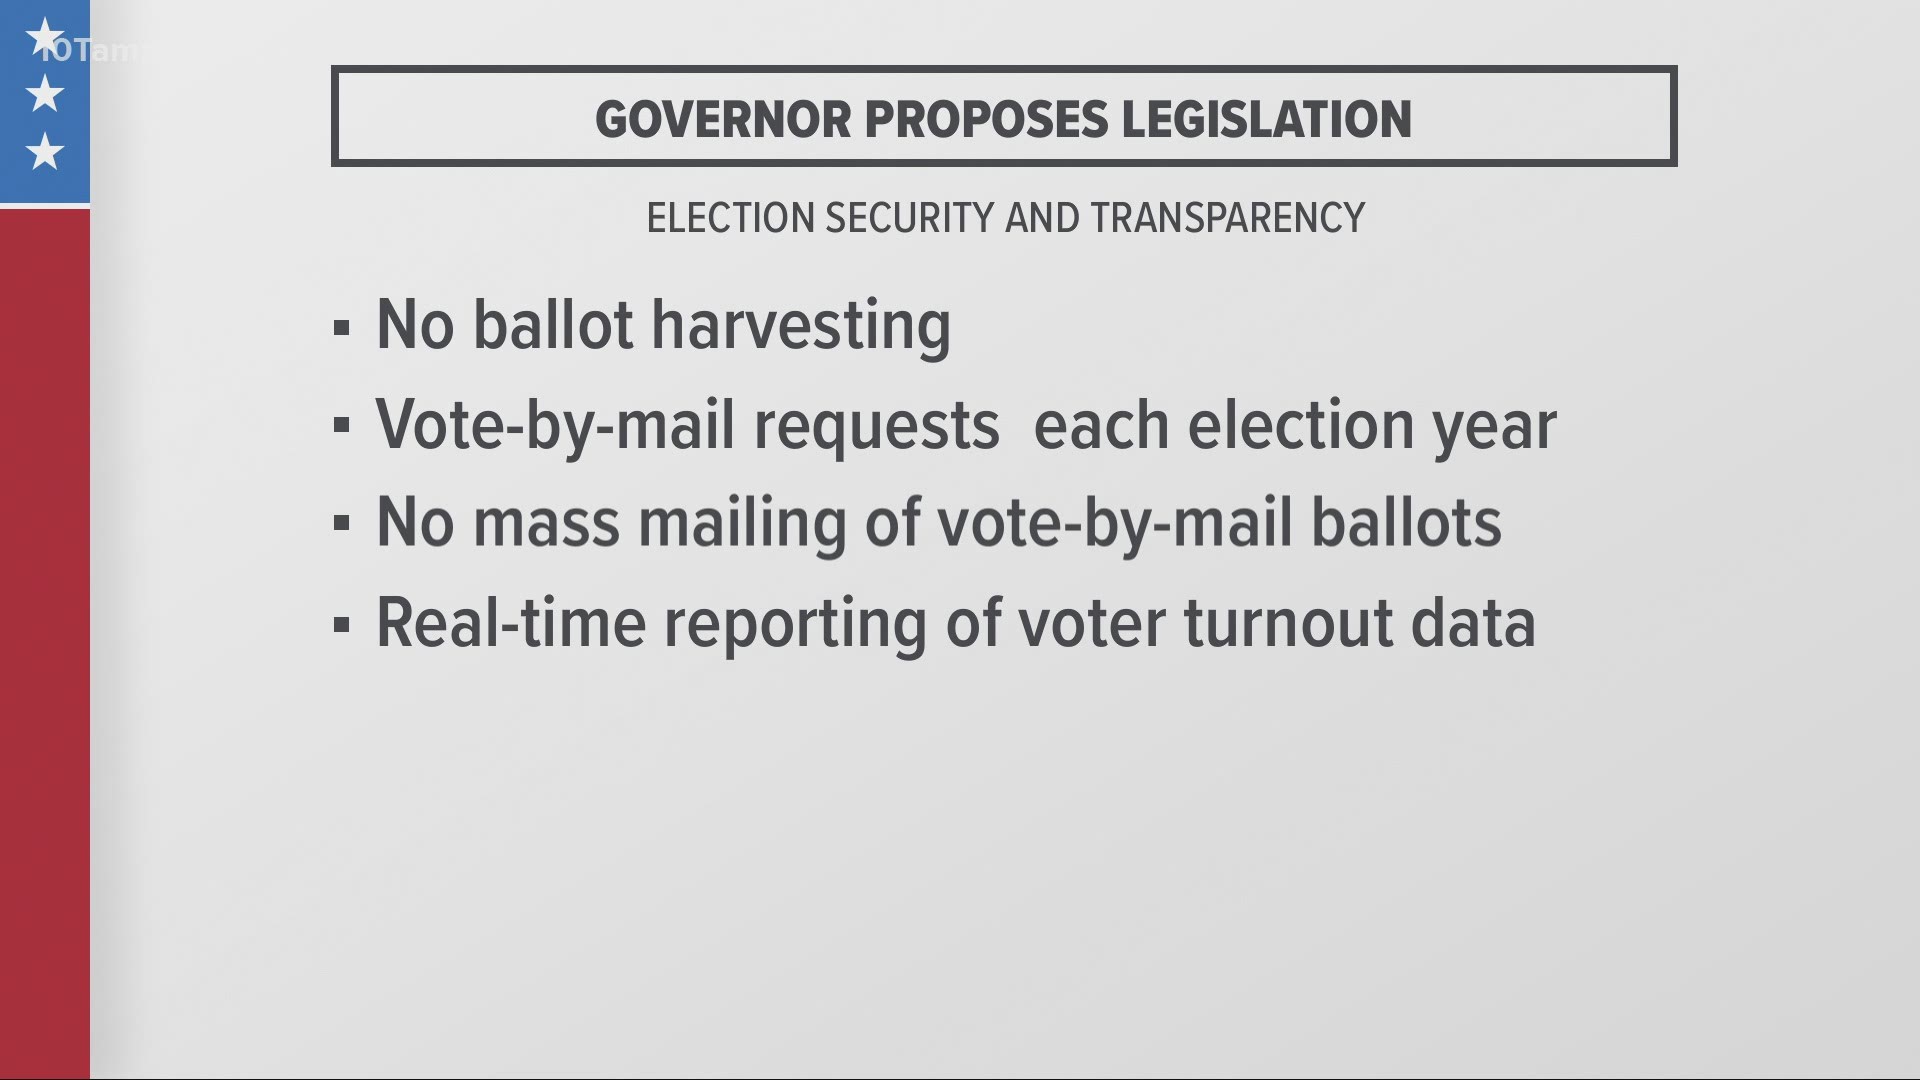 The new measures are aimed at strengthening ballot integrity and election transparency.